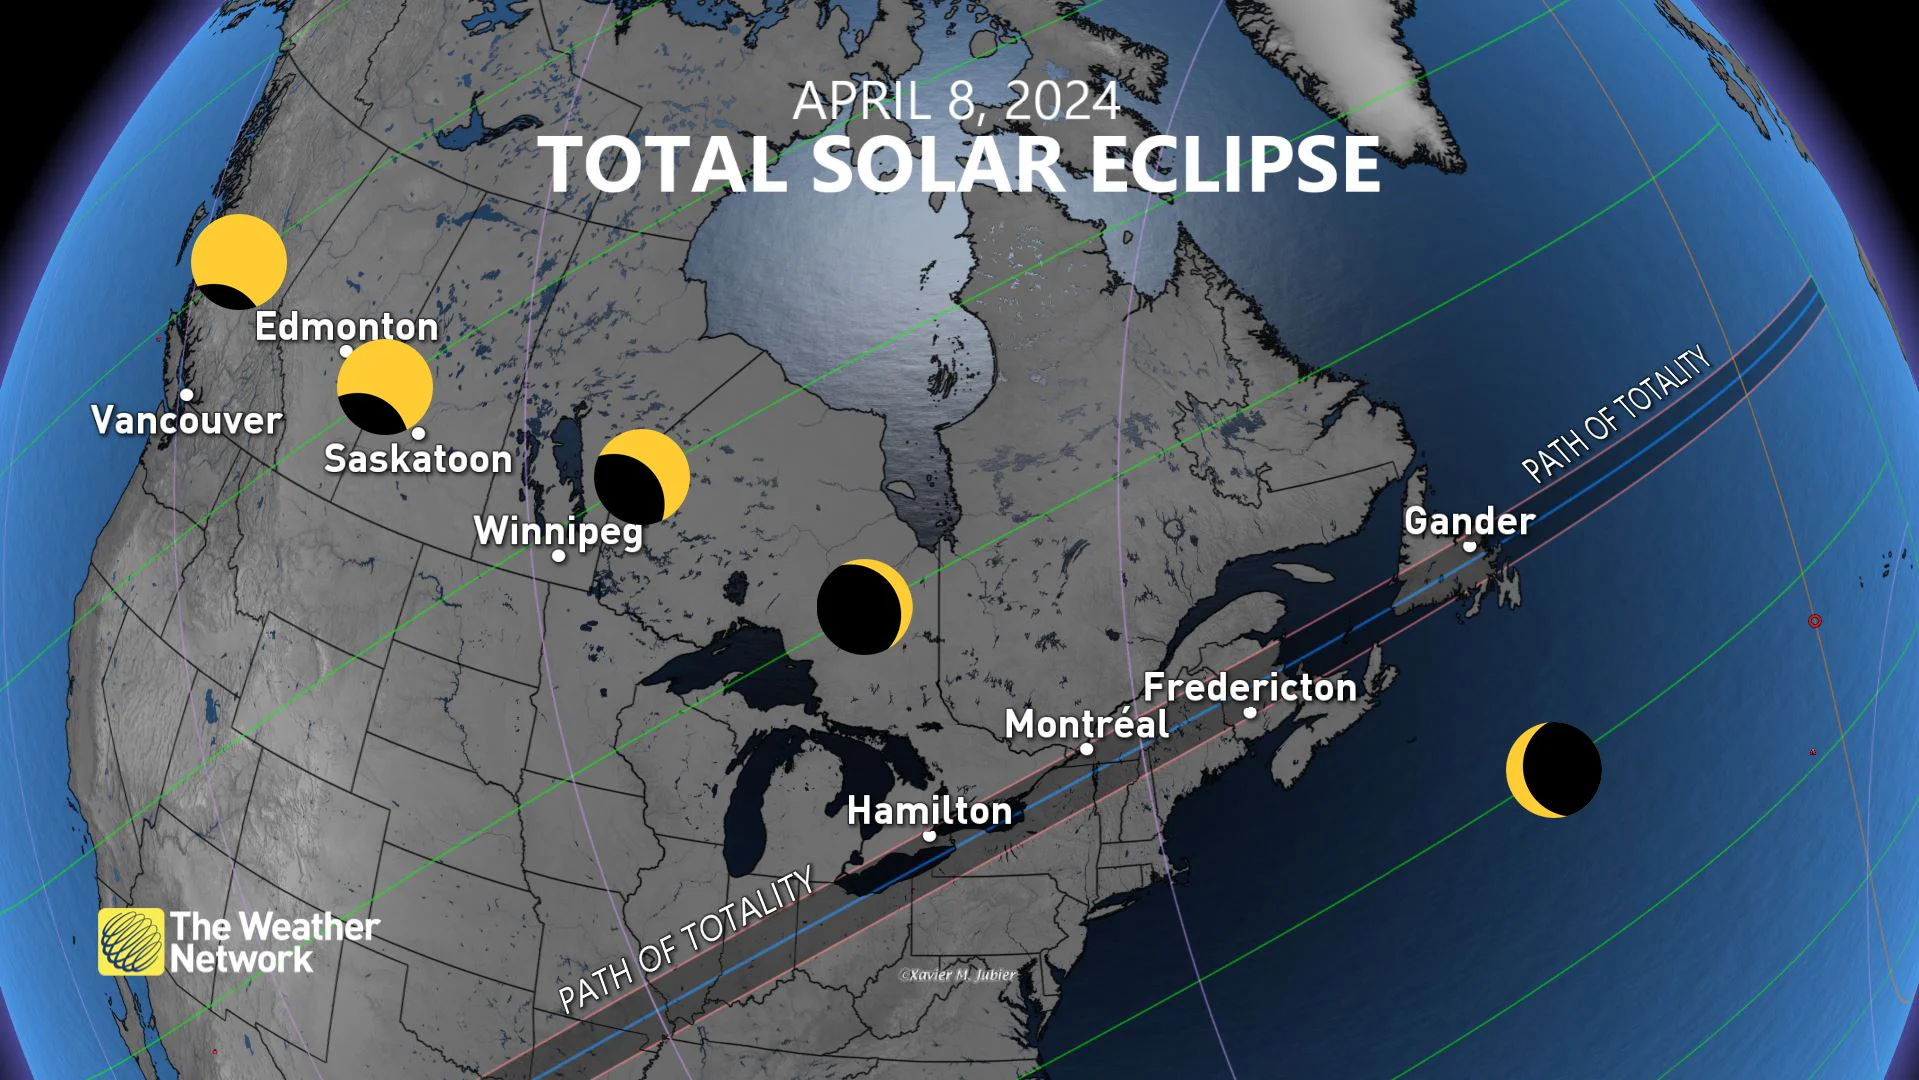 A 'Ring of Fire' solar eclipse happens one year from now. Start